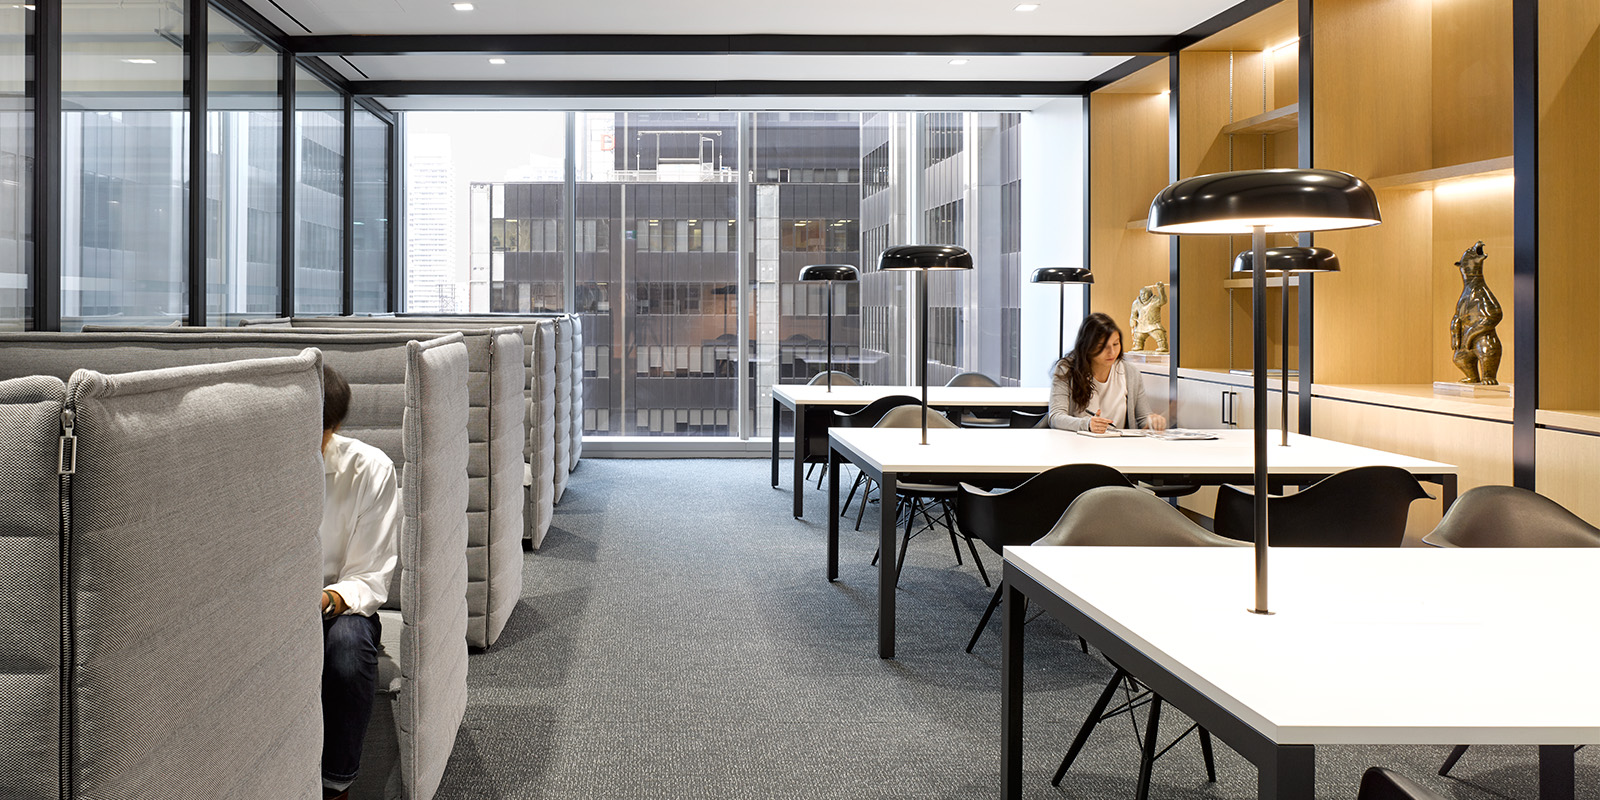 OMERS office library with tables, lamps, and upholstered booth seating